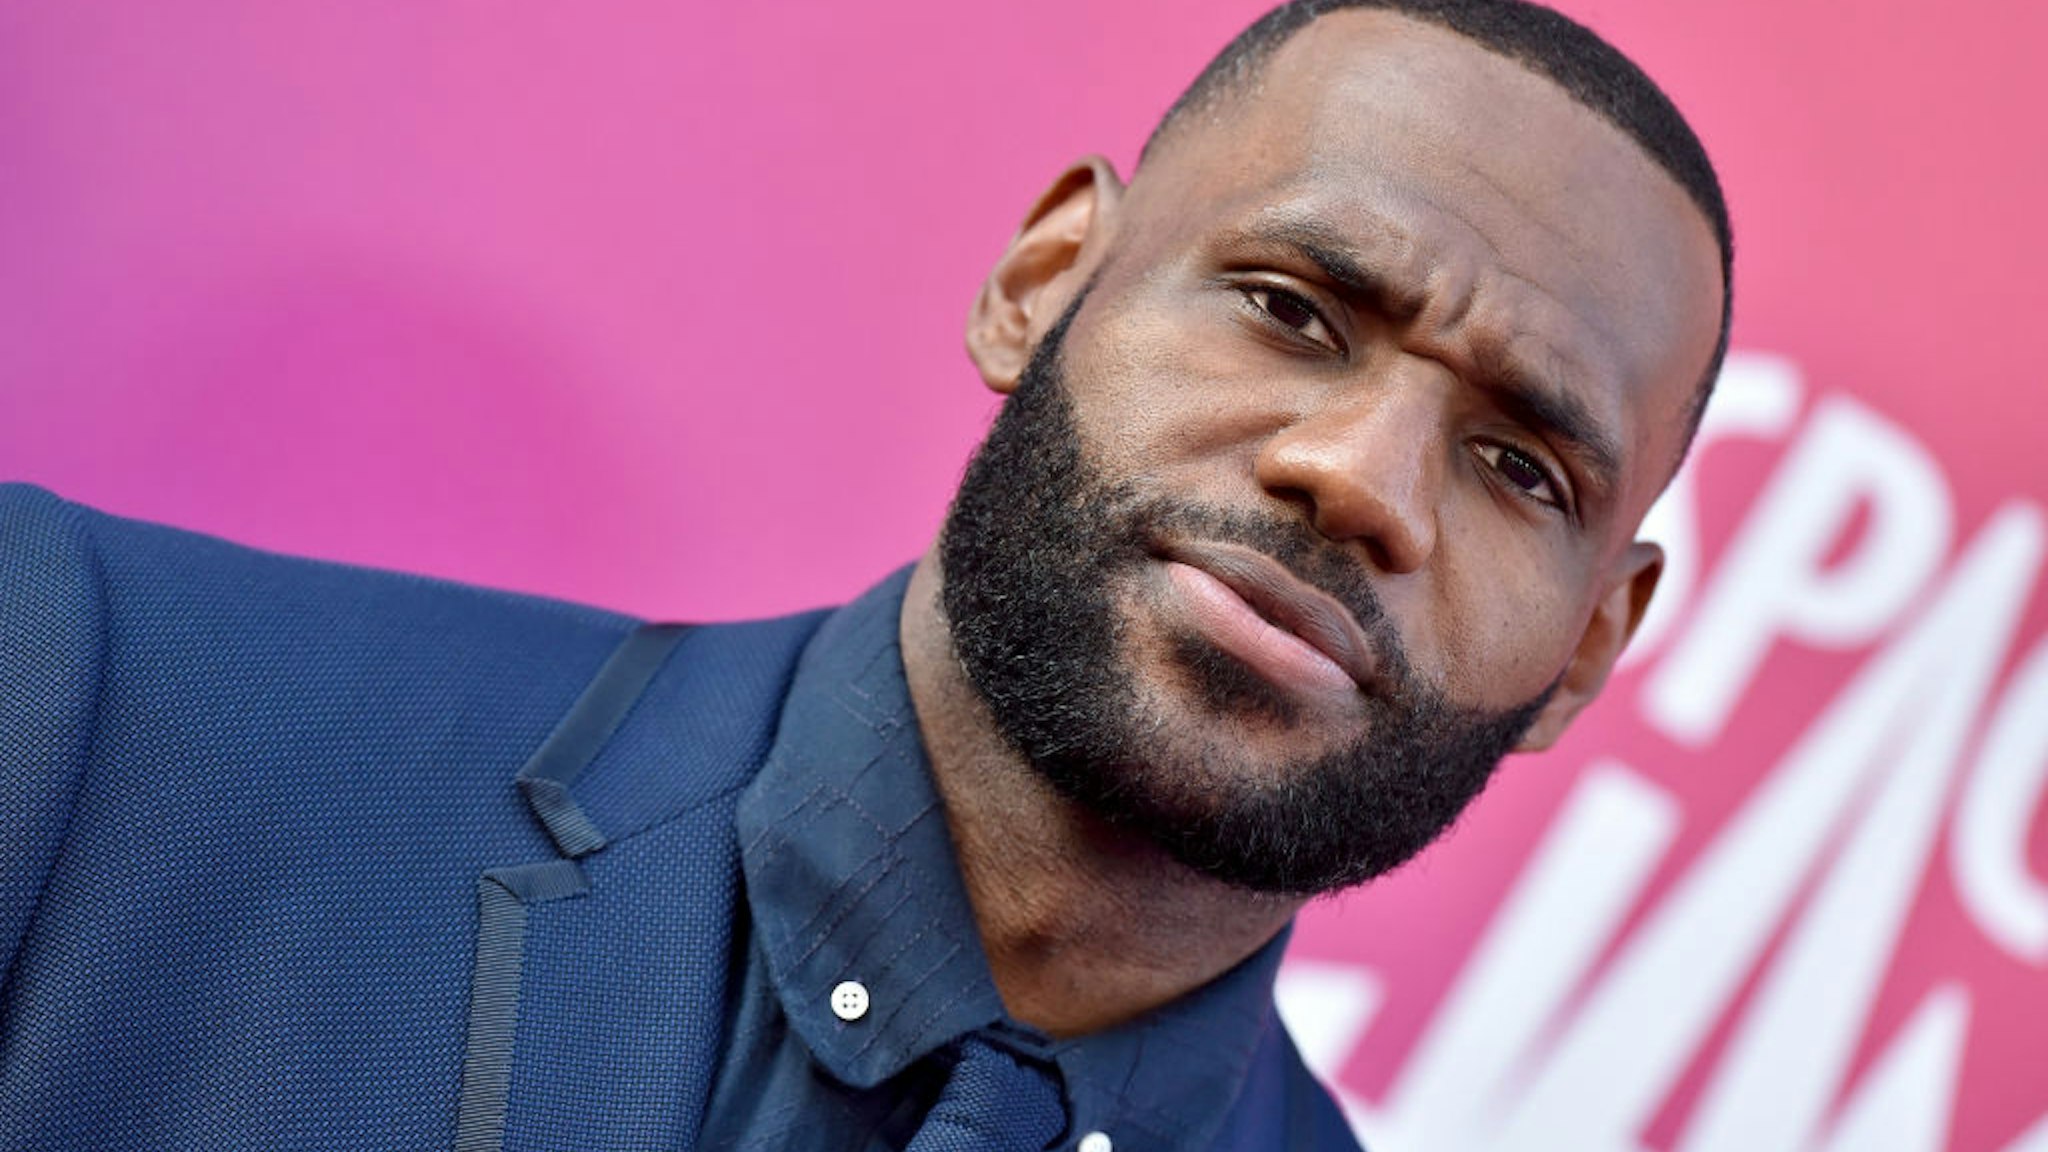 LeBron James attends the Premiere of Warner Bros "Space Jam: A New Legacy" at Regal LA Live on July 12, 2021 in Los Angeles, California.